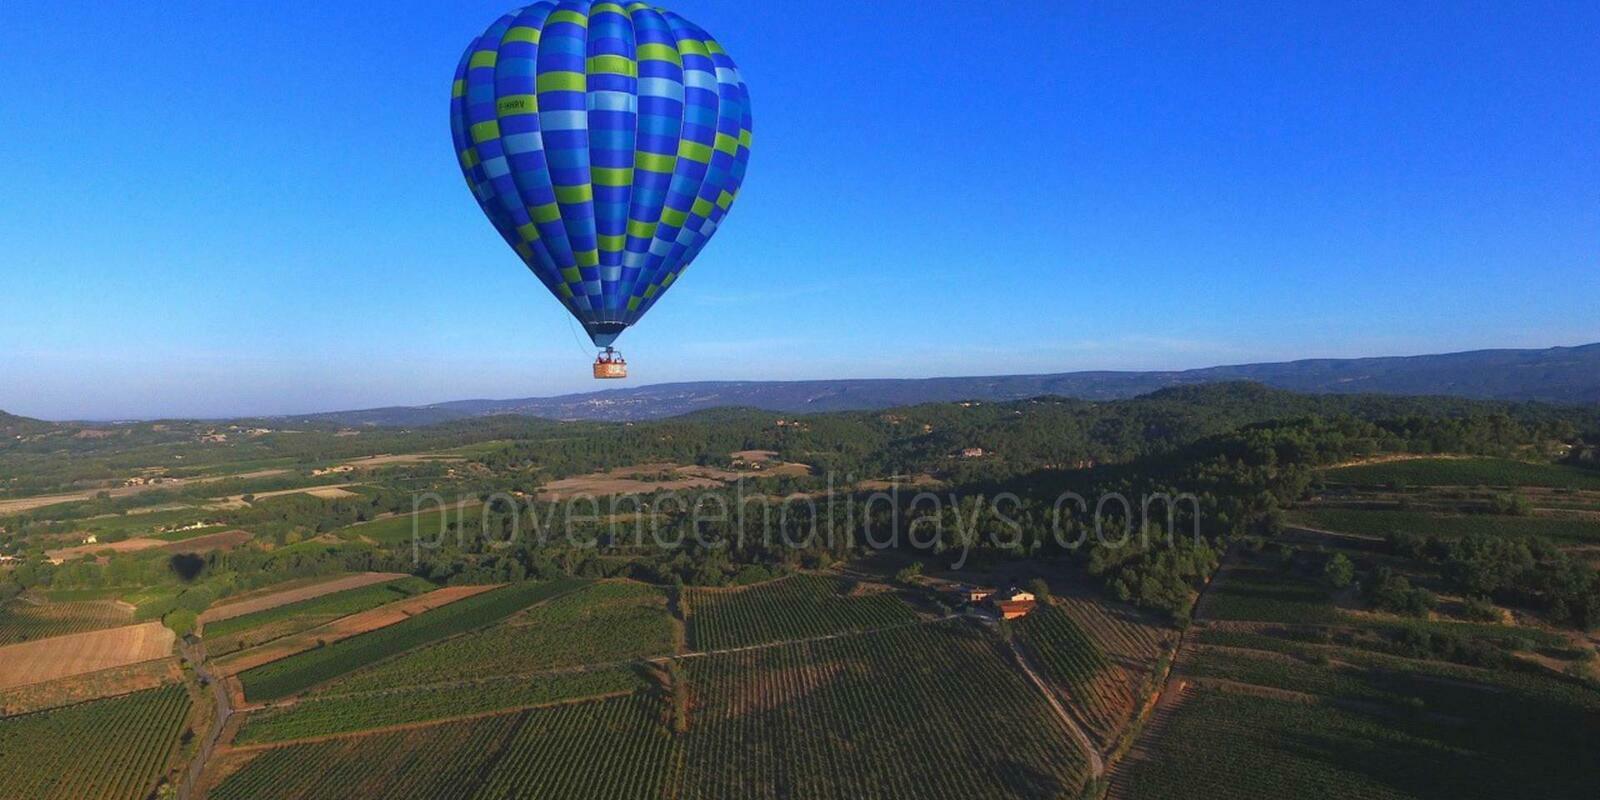 Flying over the Luberon in a hot-air balloon - 2